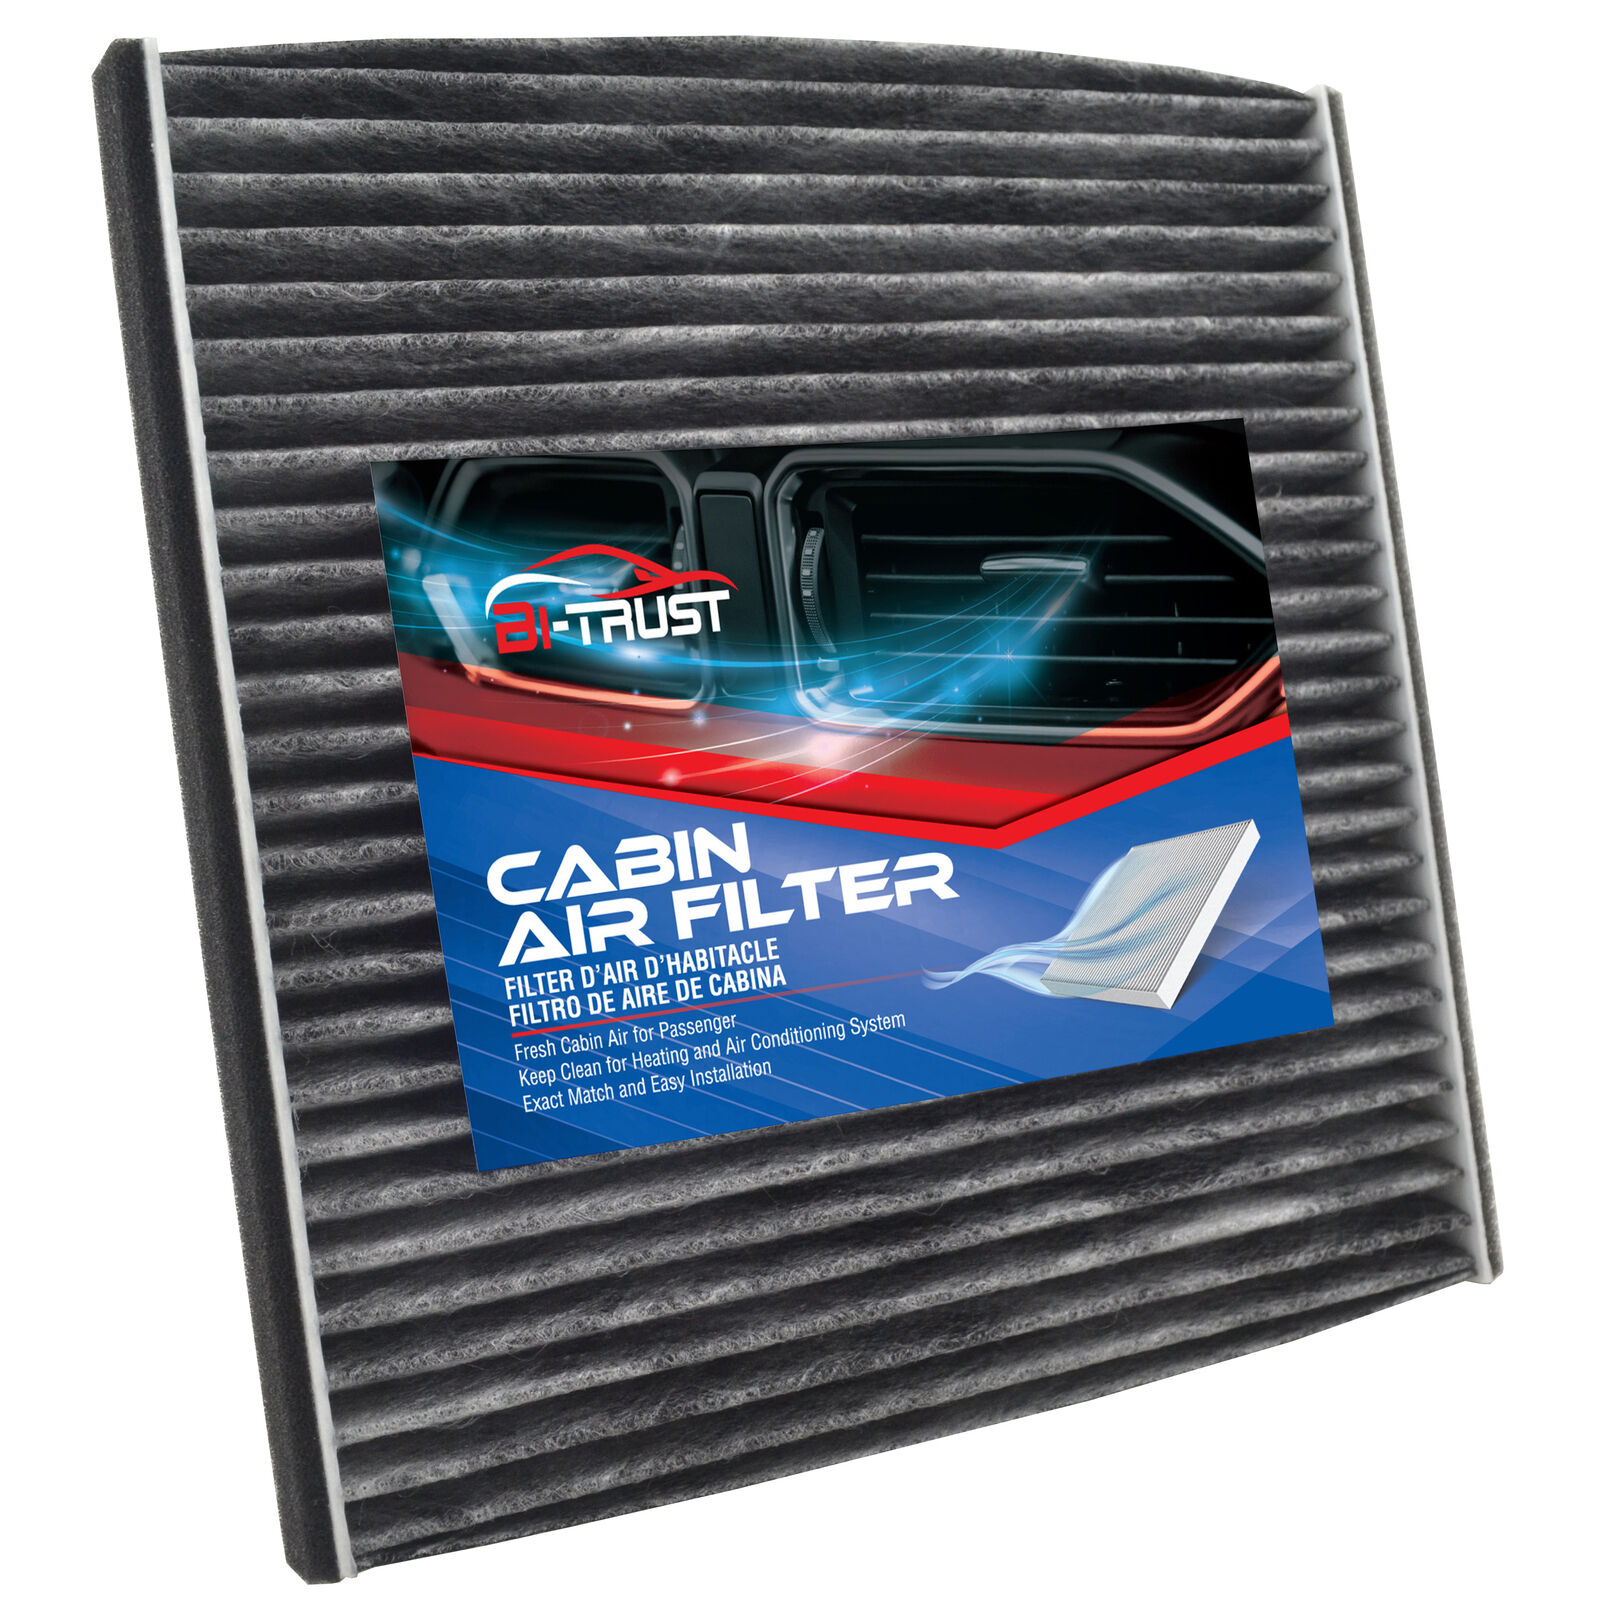 Cabin Air Filter for Toyota Camry 2002-2006 Sienna 2004-2010 Solara 2004-2008